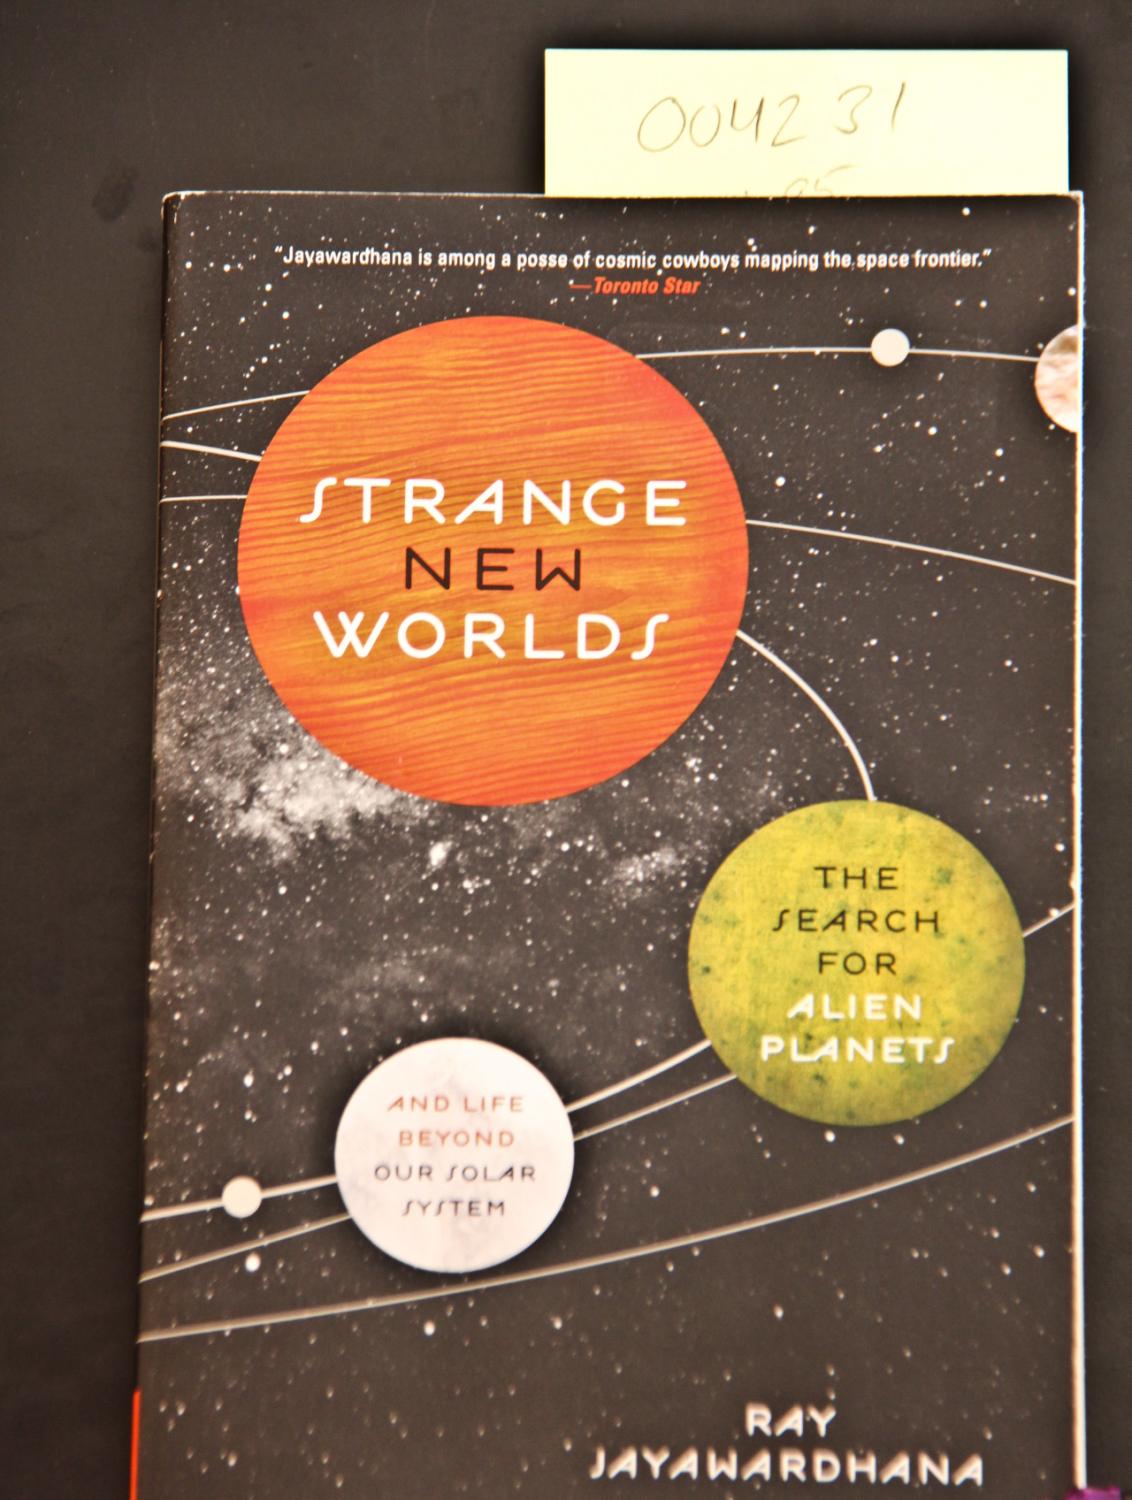 Strange New Worlds: The Search For Alien Planets And Life Beyond - Ray Jayawardhana